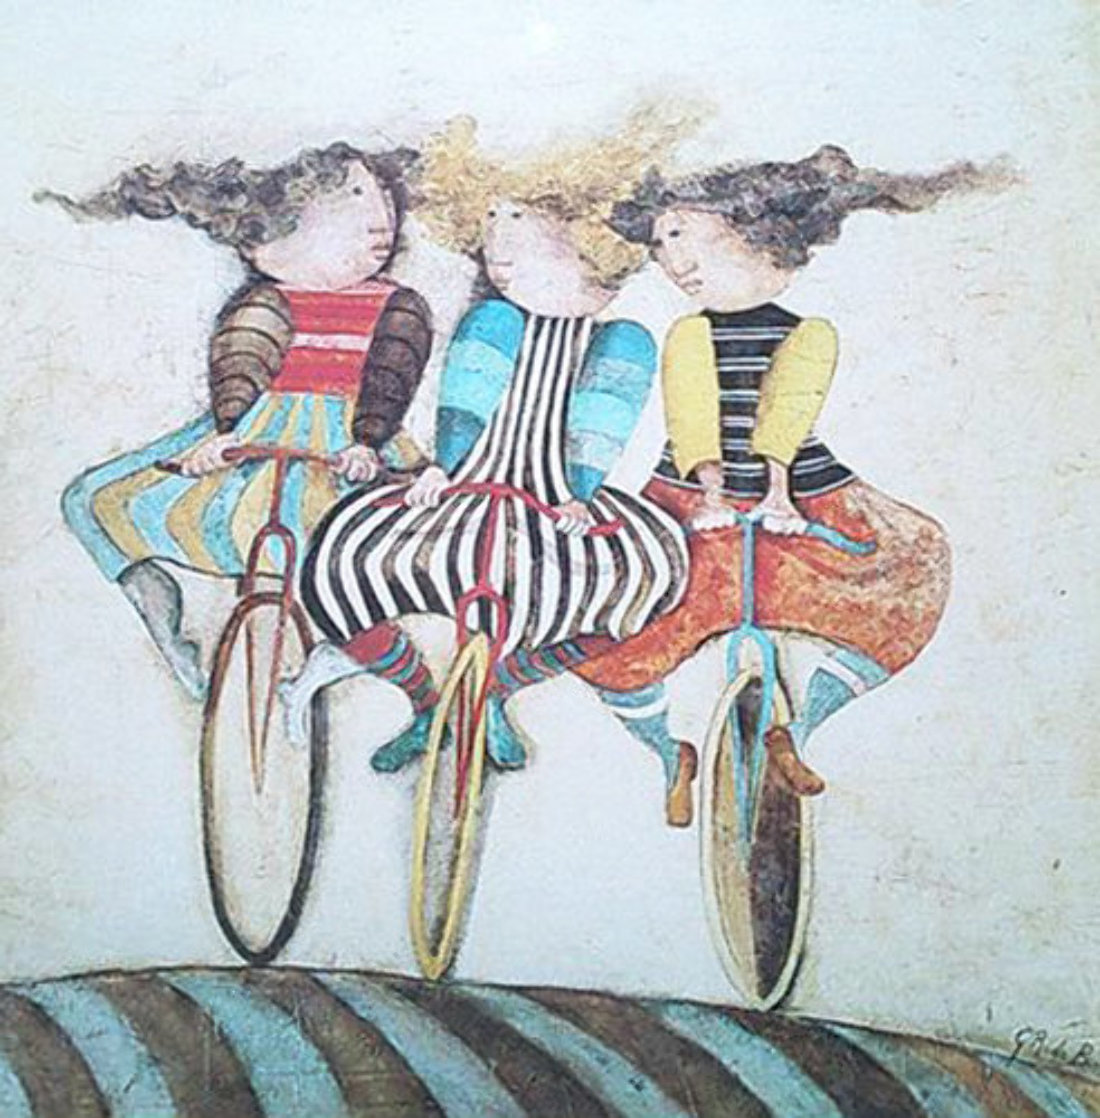 Holiday on Wheels   1976 Limited Edition Print by Graciela Rodo Boulanger